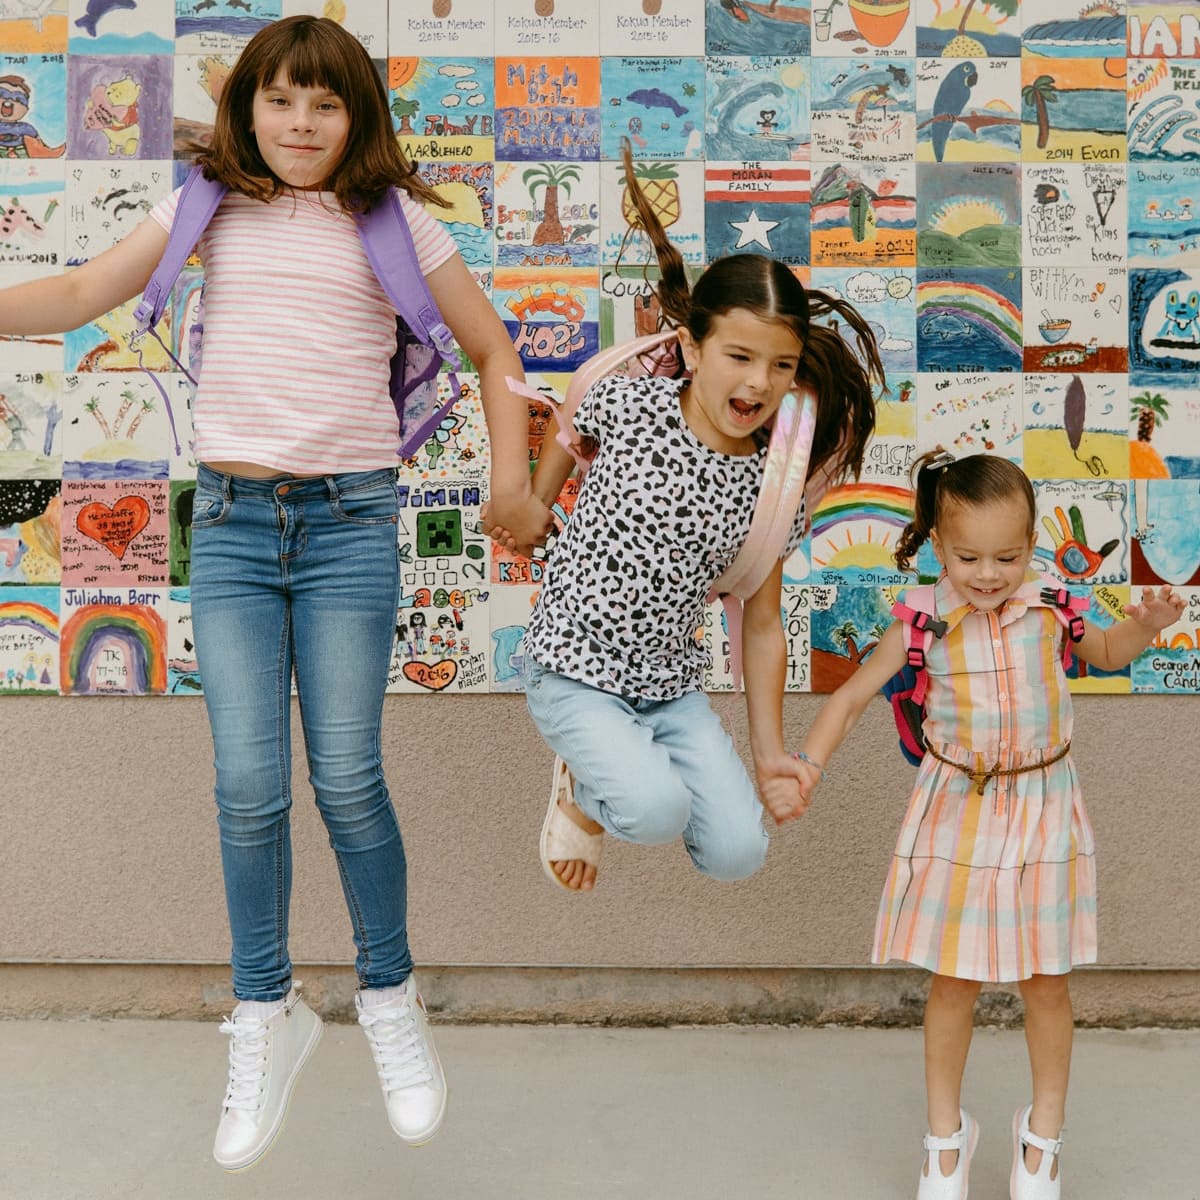 Get ahead! Affordable school clothes from Macy's for all ages